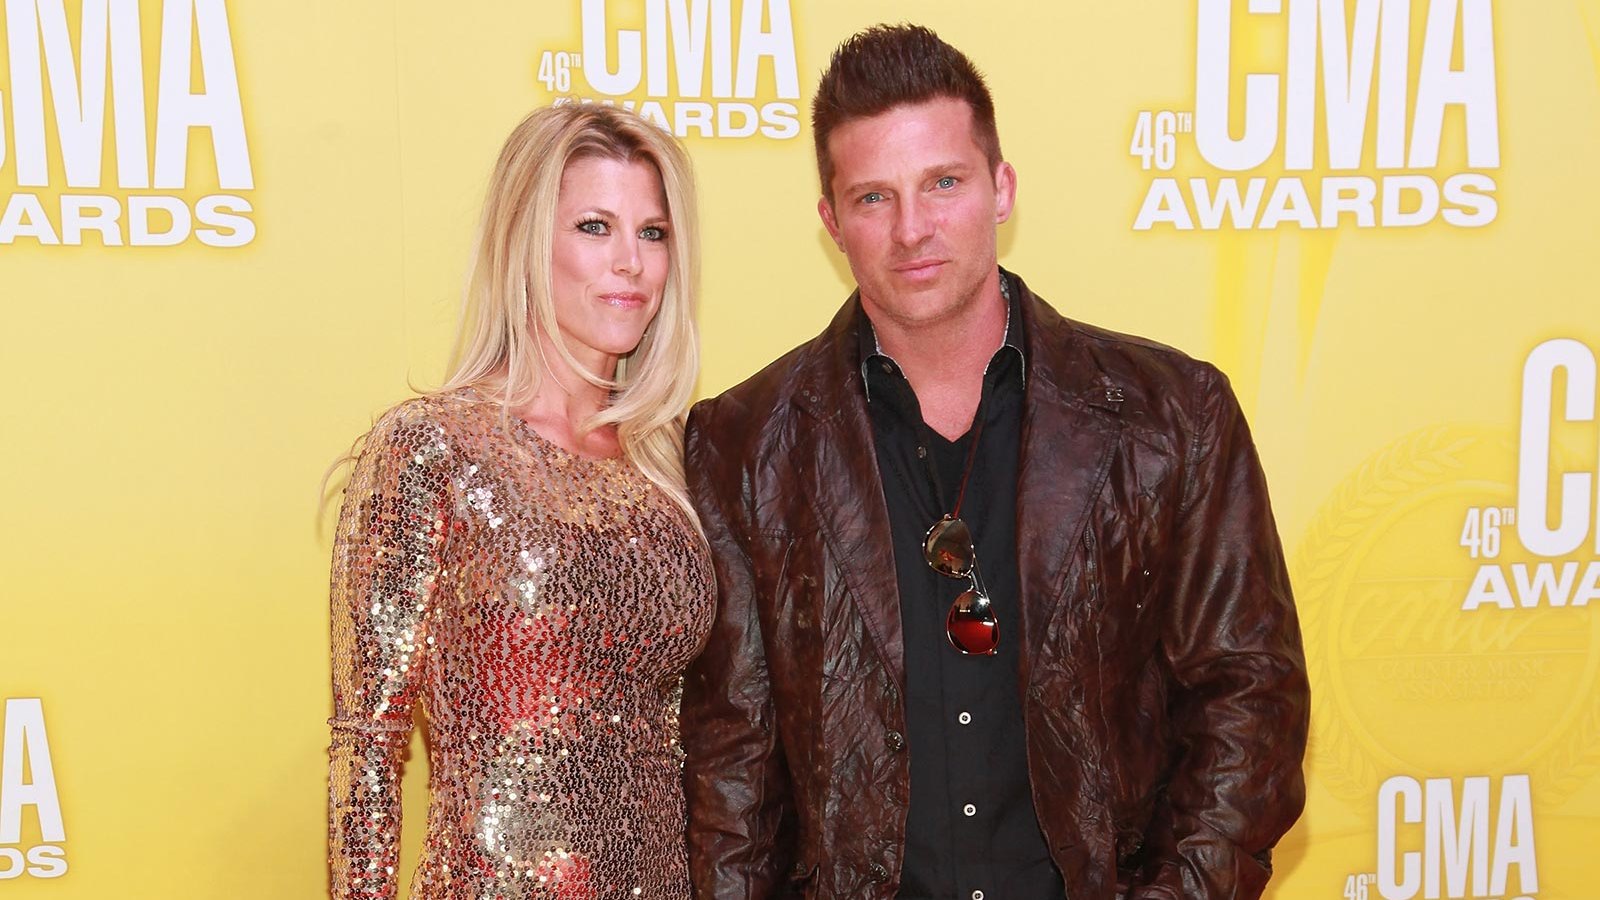 Steve Burton and Ex Wife Sheree Burton Will Not Pay Spousal Support According to Divorce Settlement